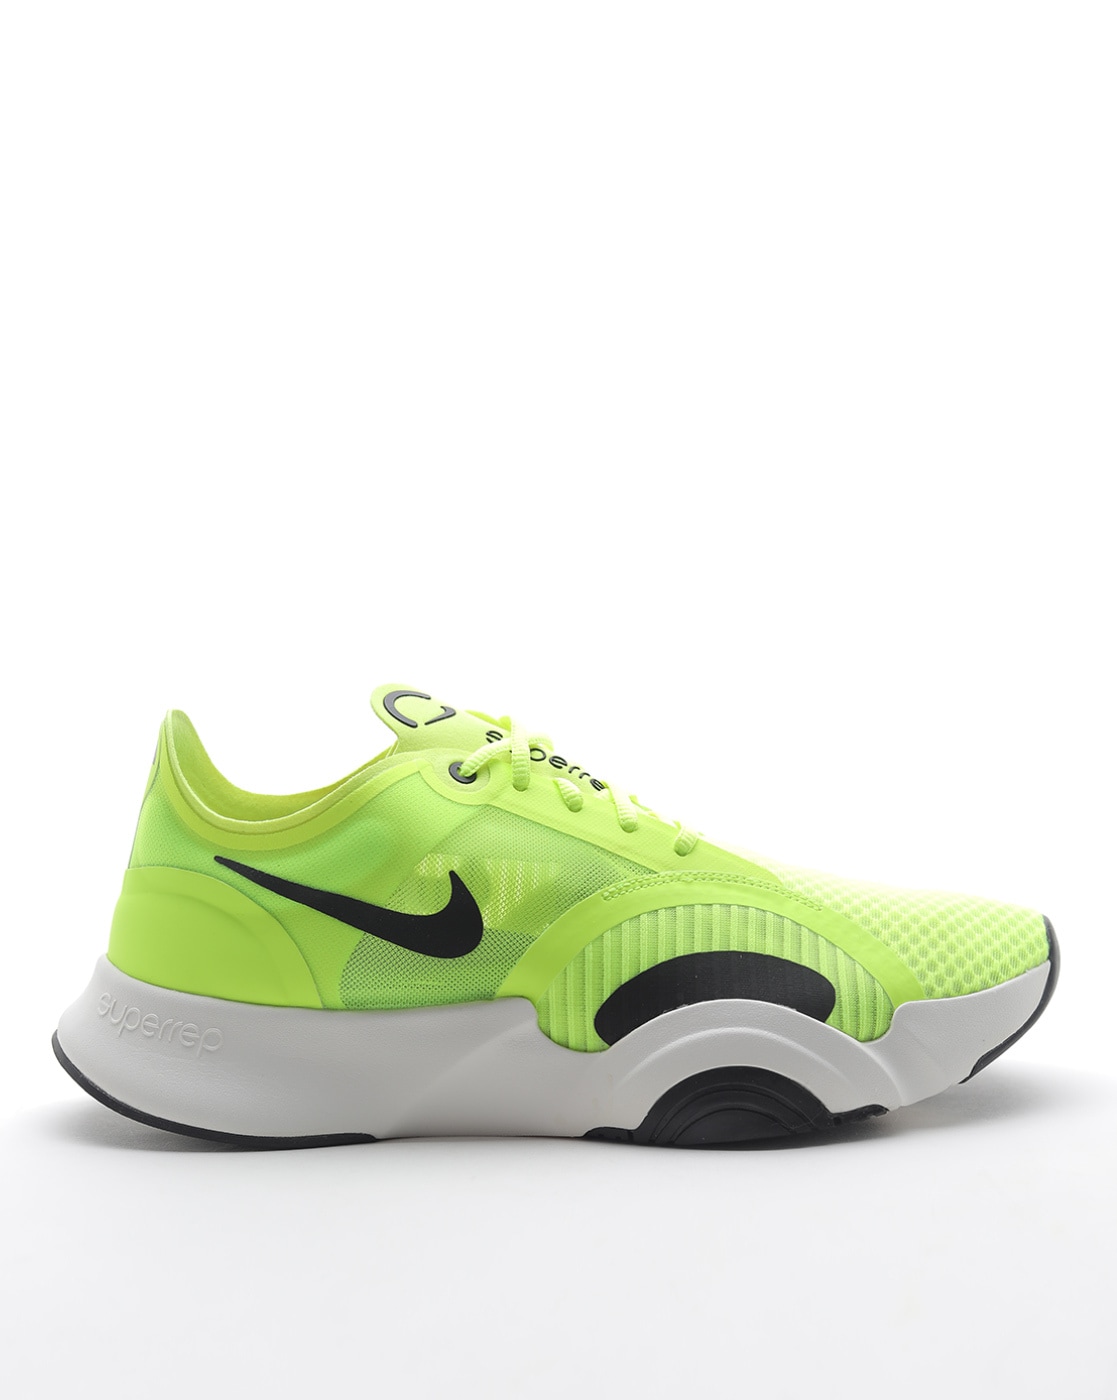 Buy Fluorescent Yellow Sports Shoes for 